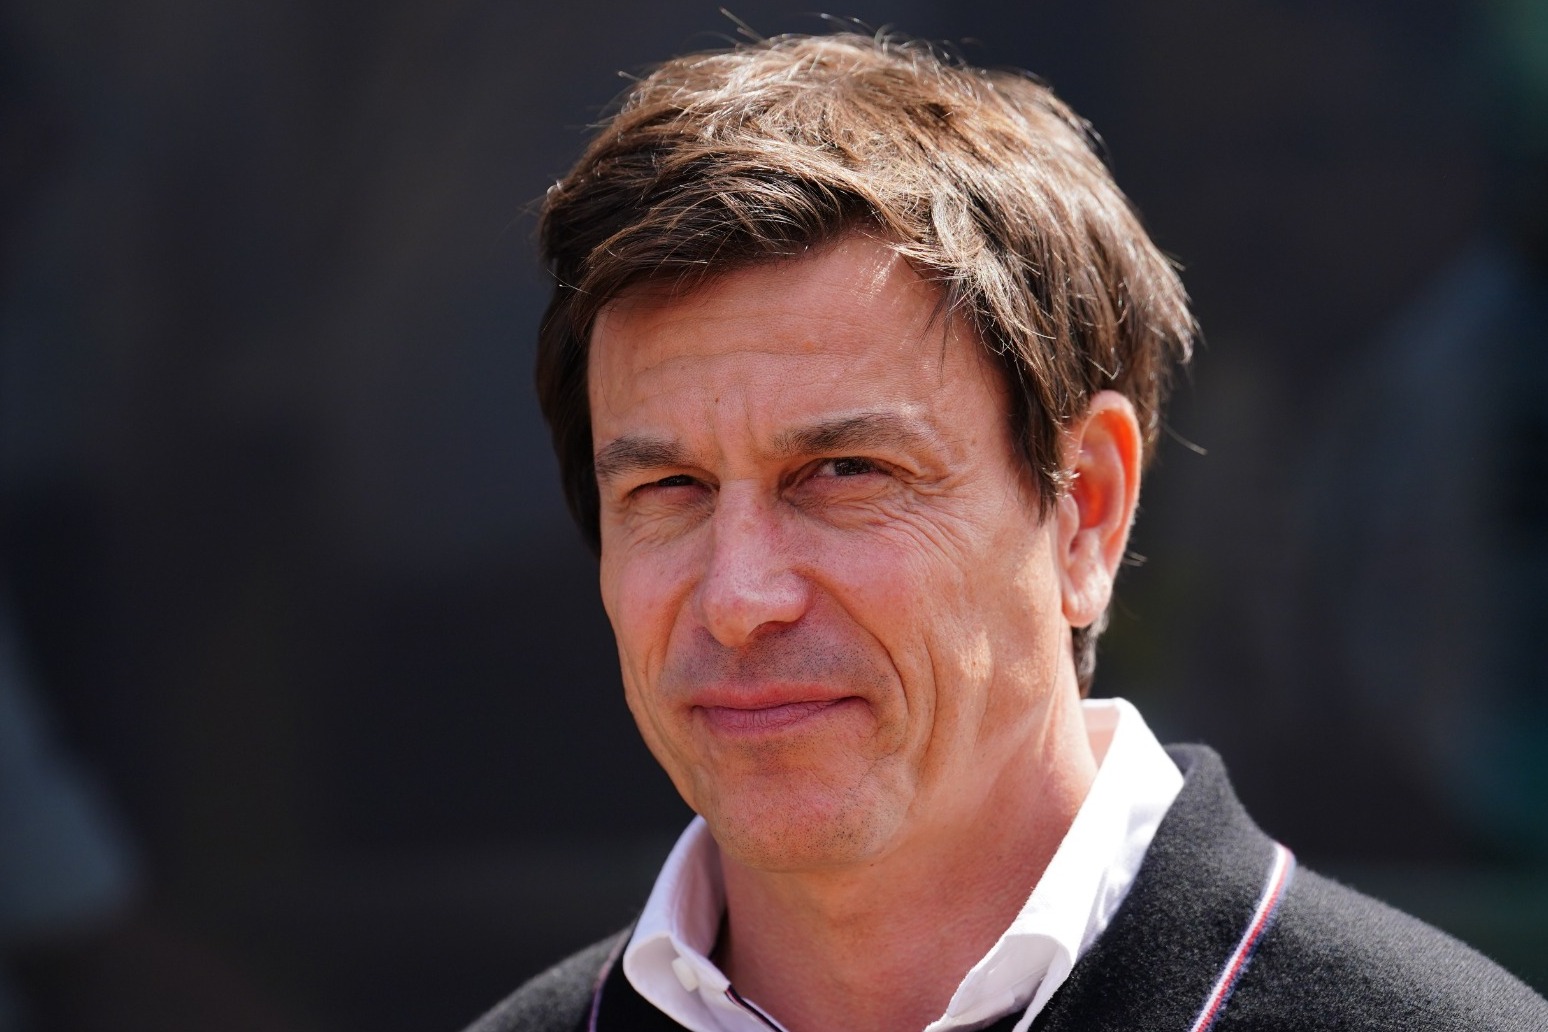 Mercedes boss Toto Wolff to miss Japanese Grand Prix due to knee surgery 